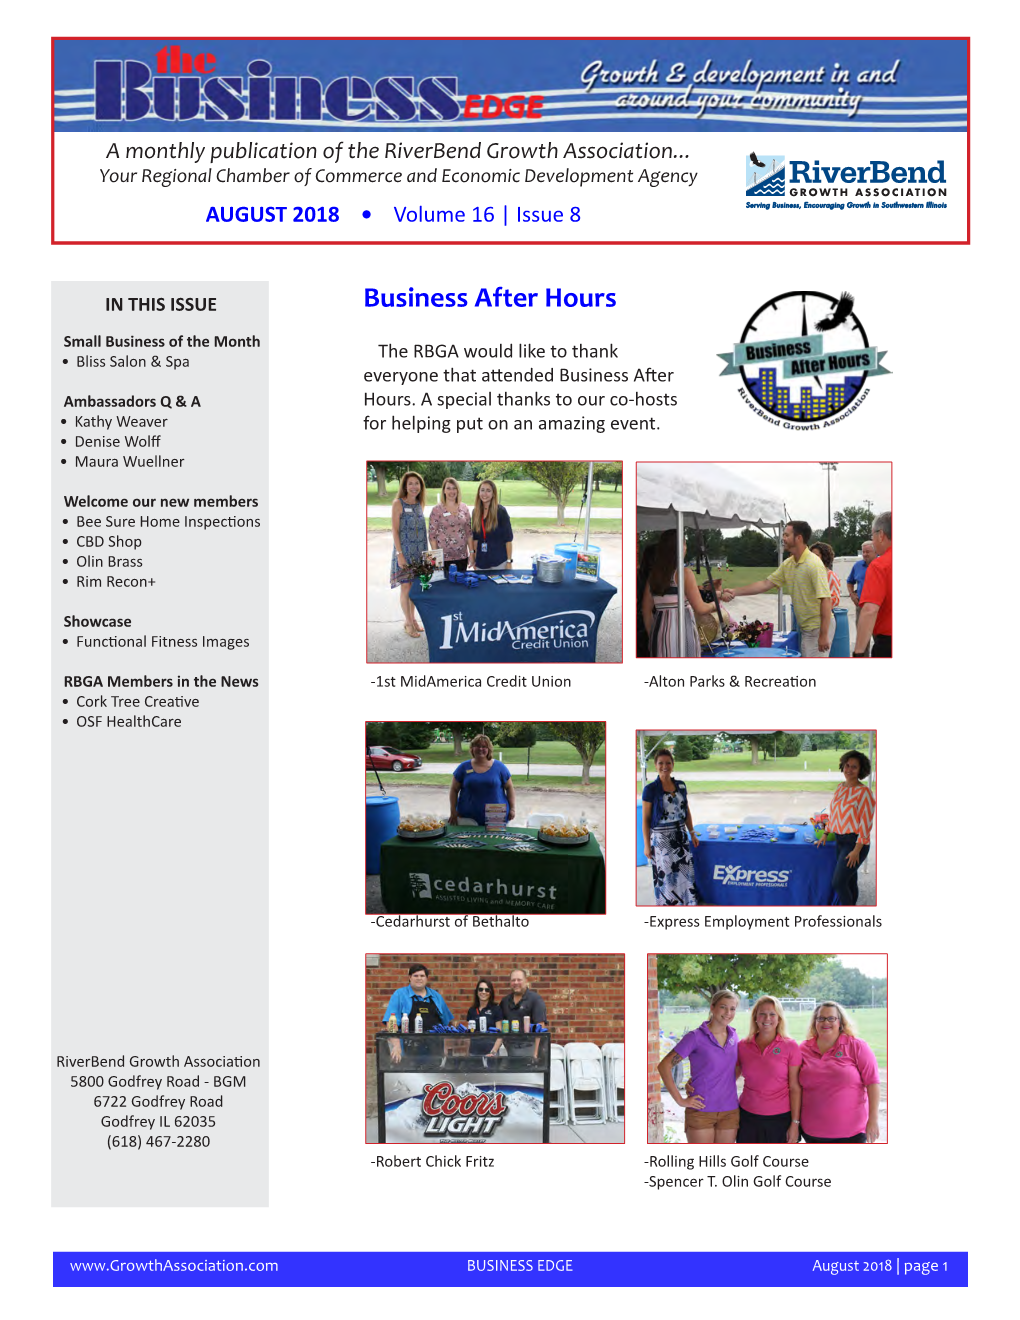 AUGUST 2018 • Volume 16 | Issue 8 Serving Business, Encouraging Growth in Southwestern Illinois